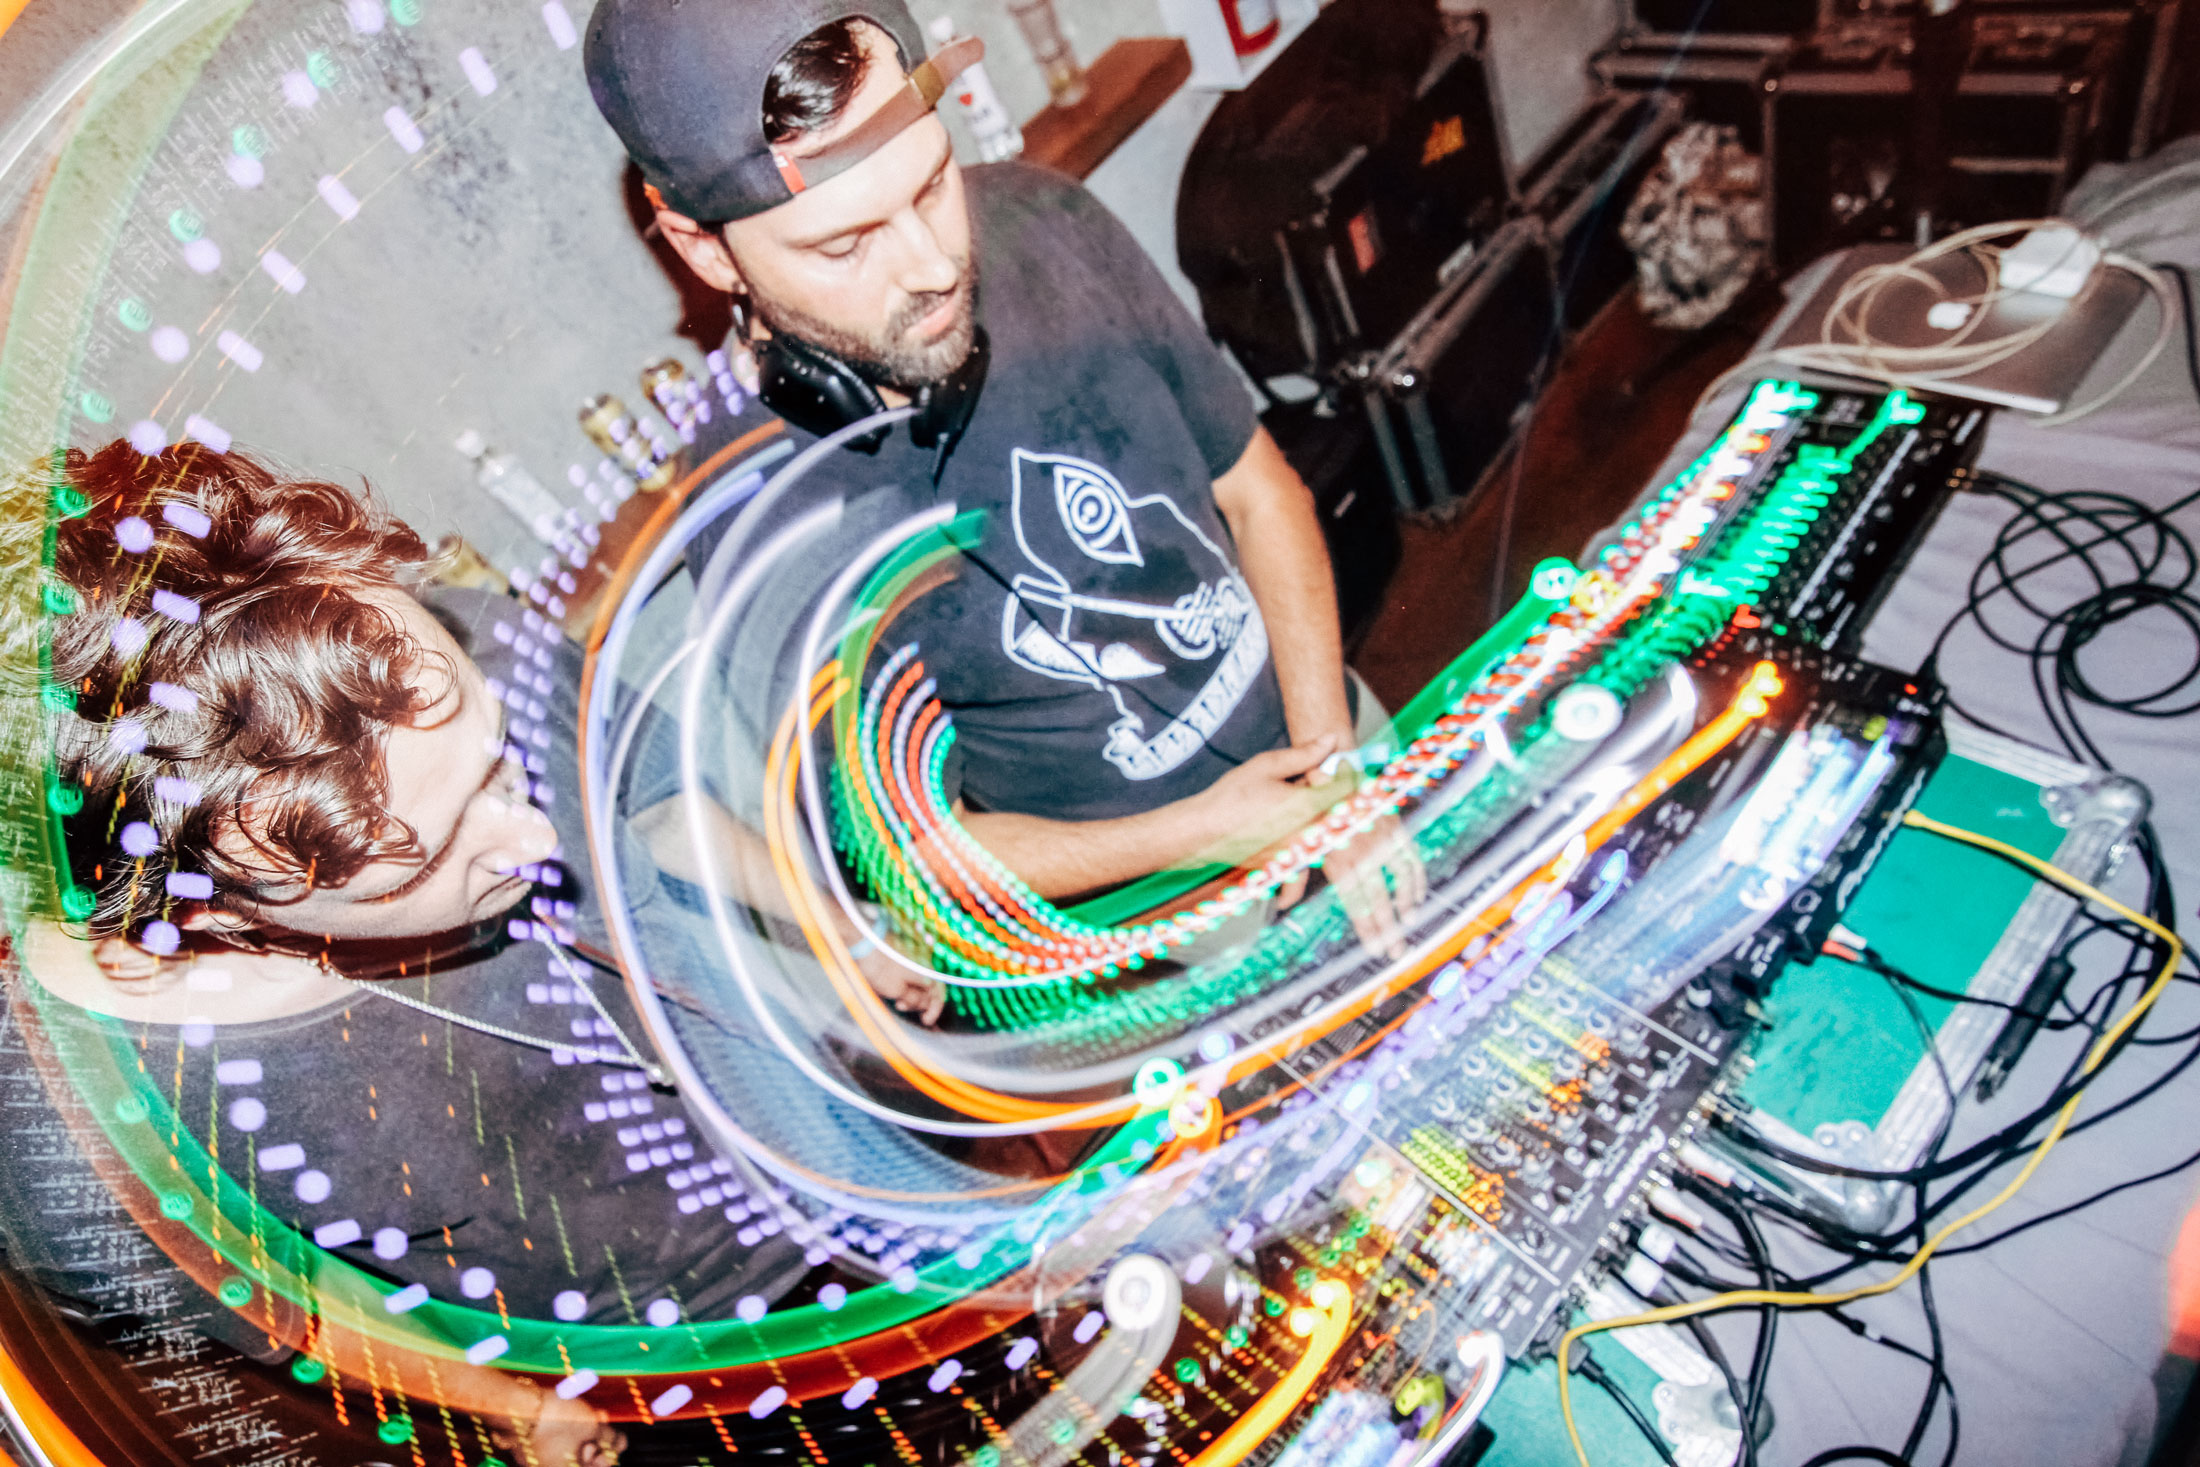 2 DJs on the left, showing them mixing and turning dials, the lights are also long exposed and they show a long round movement, leading to a dramatic photograph.